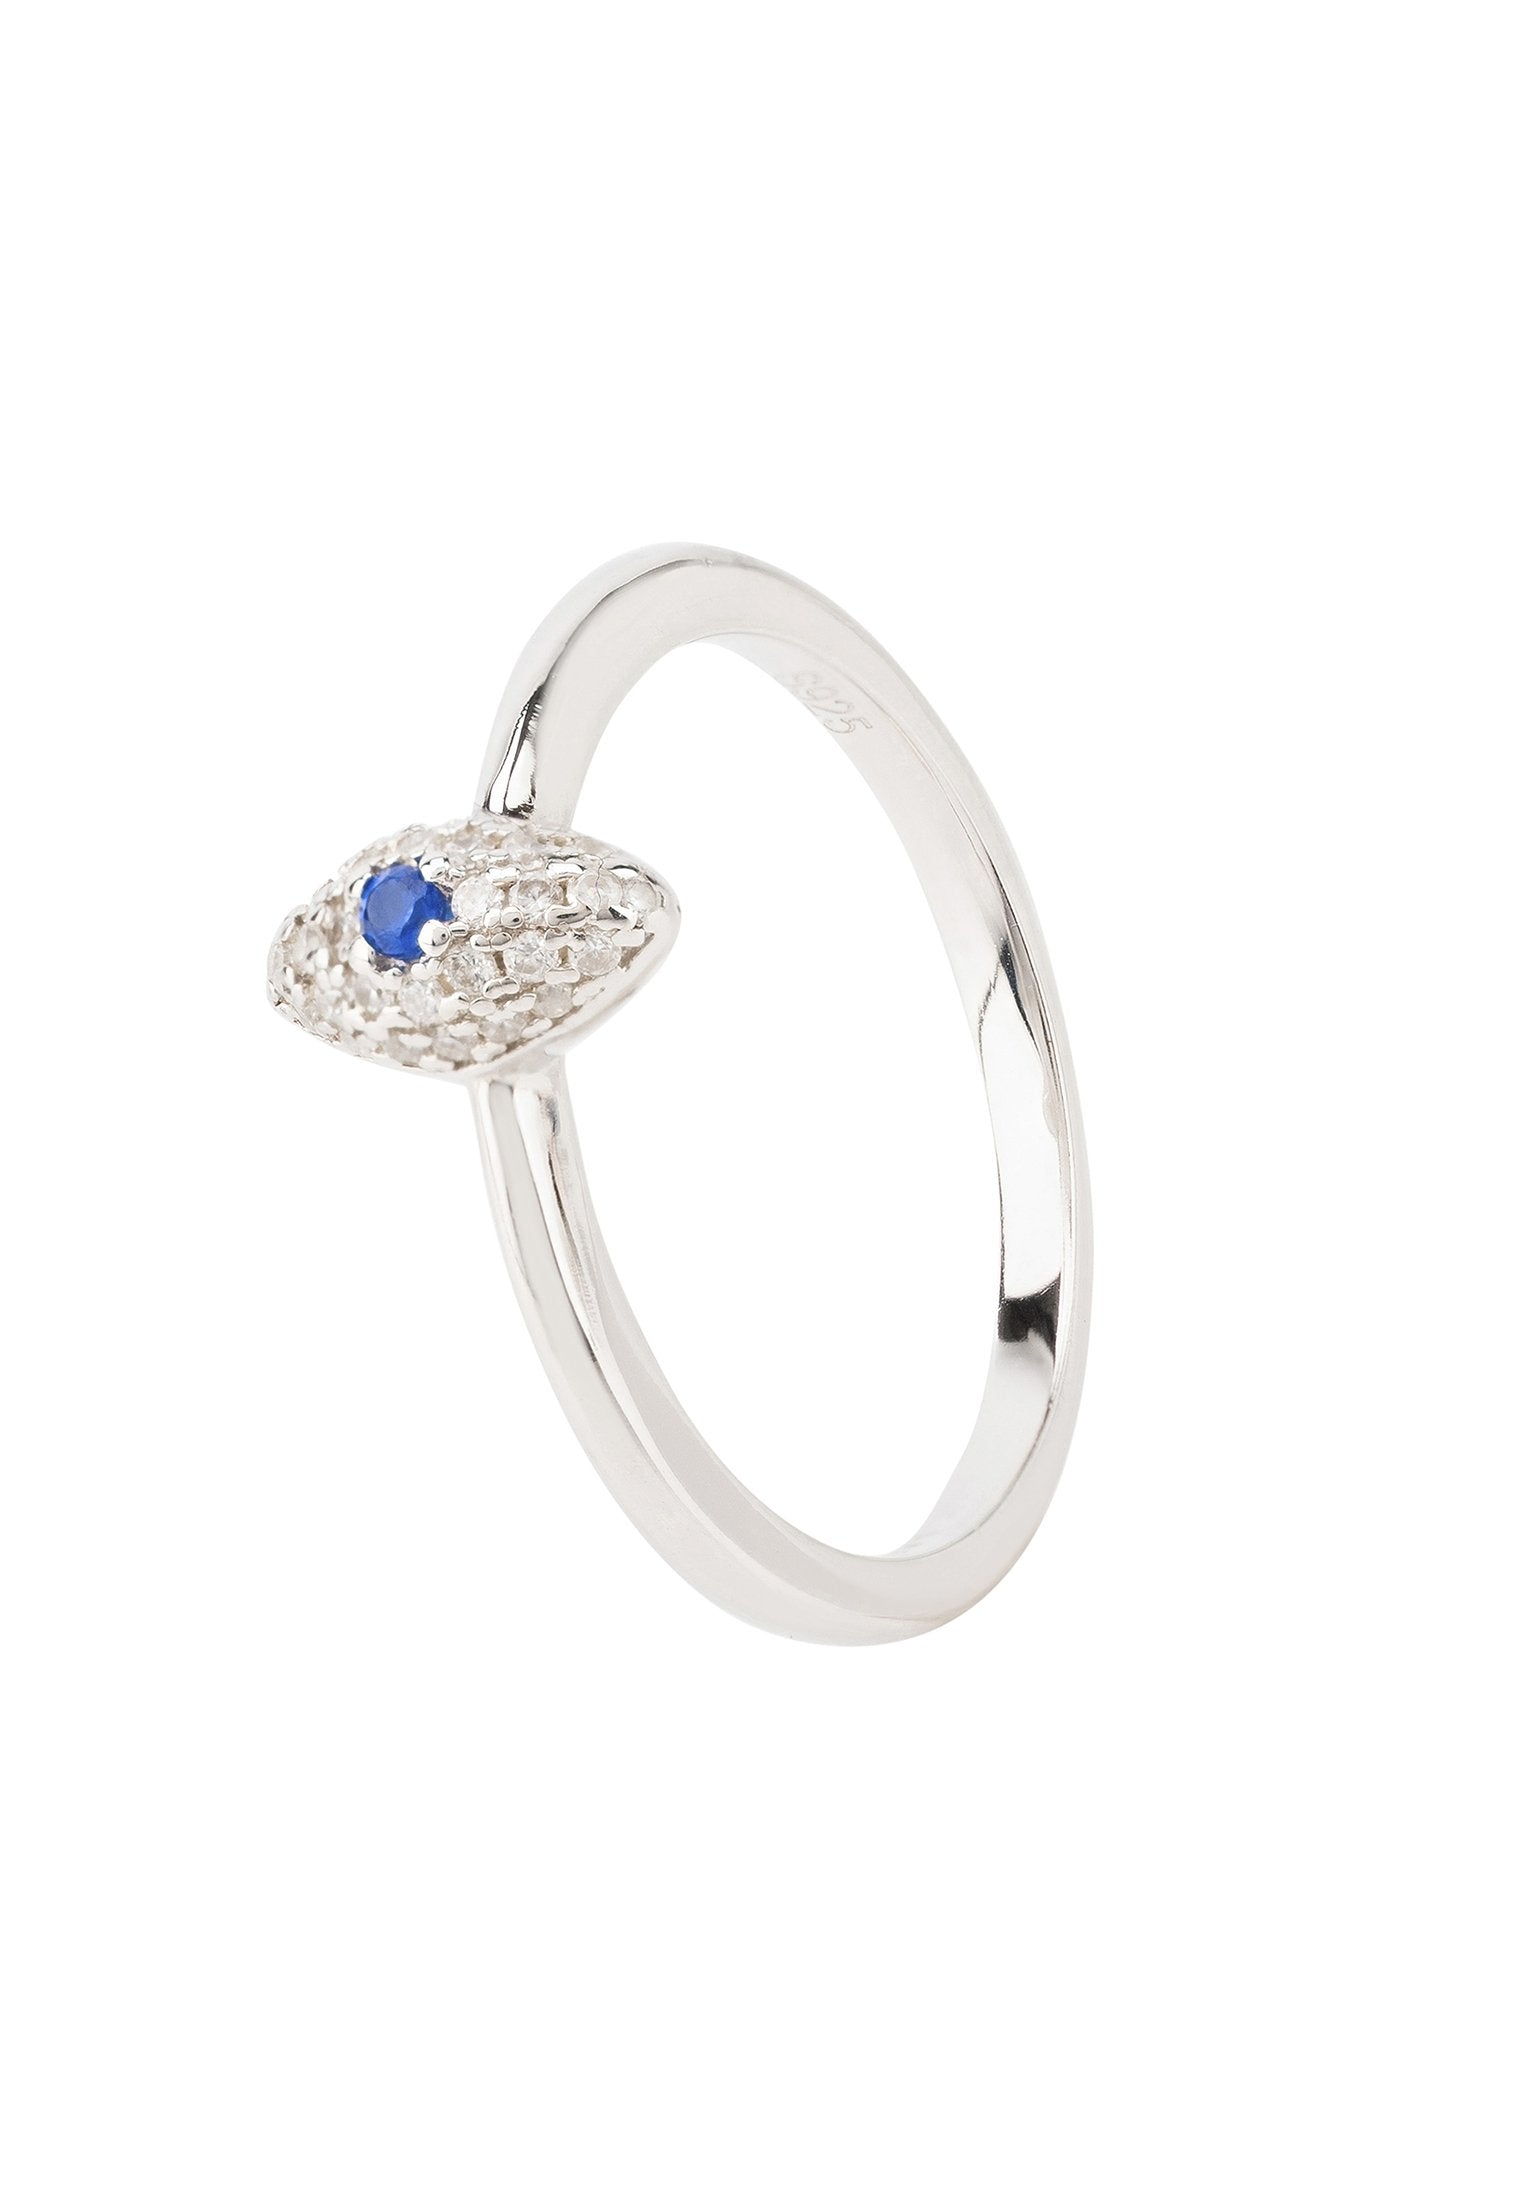 Petite Silver Eye Ring with Blue Zircon, Perfect for Everyday Styling and Protection Against Jealousy - Jewelry & Watches - Bijou Her -  -  - 